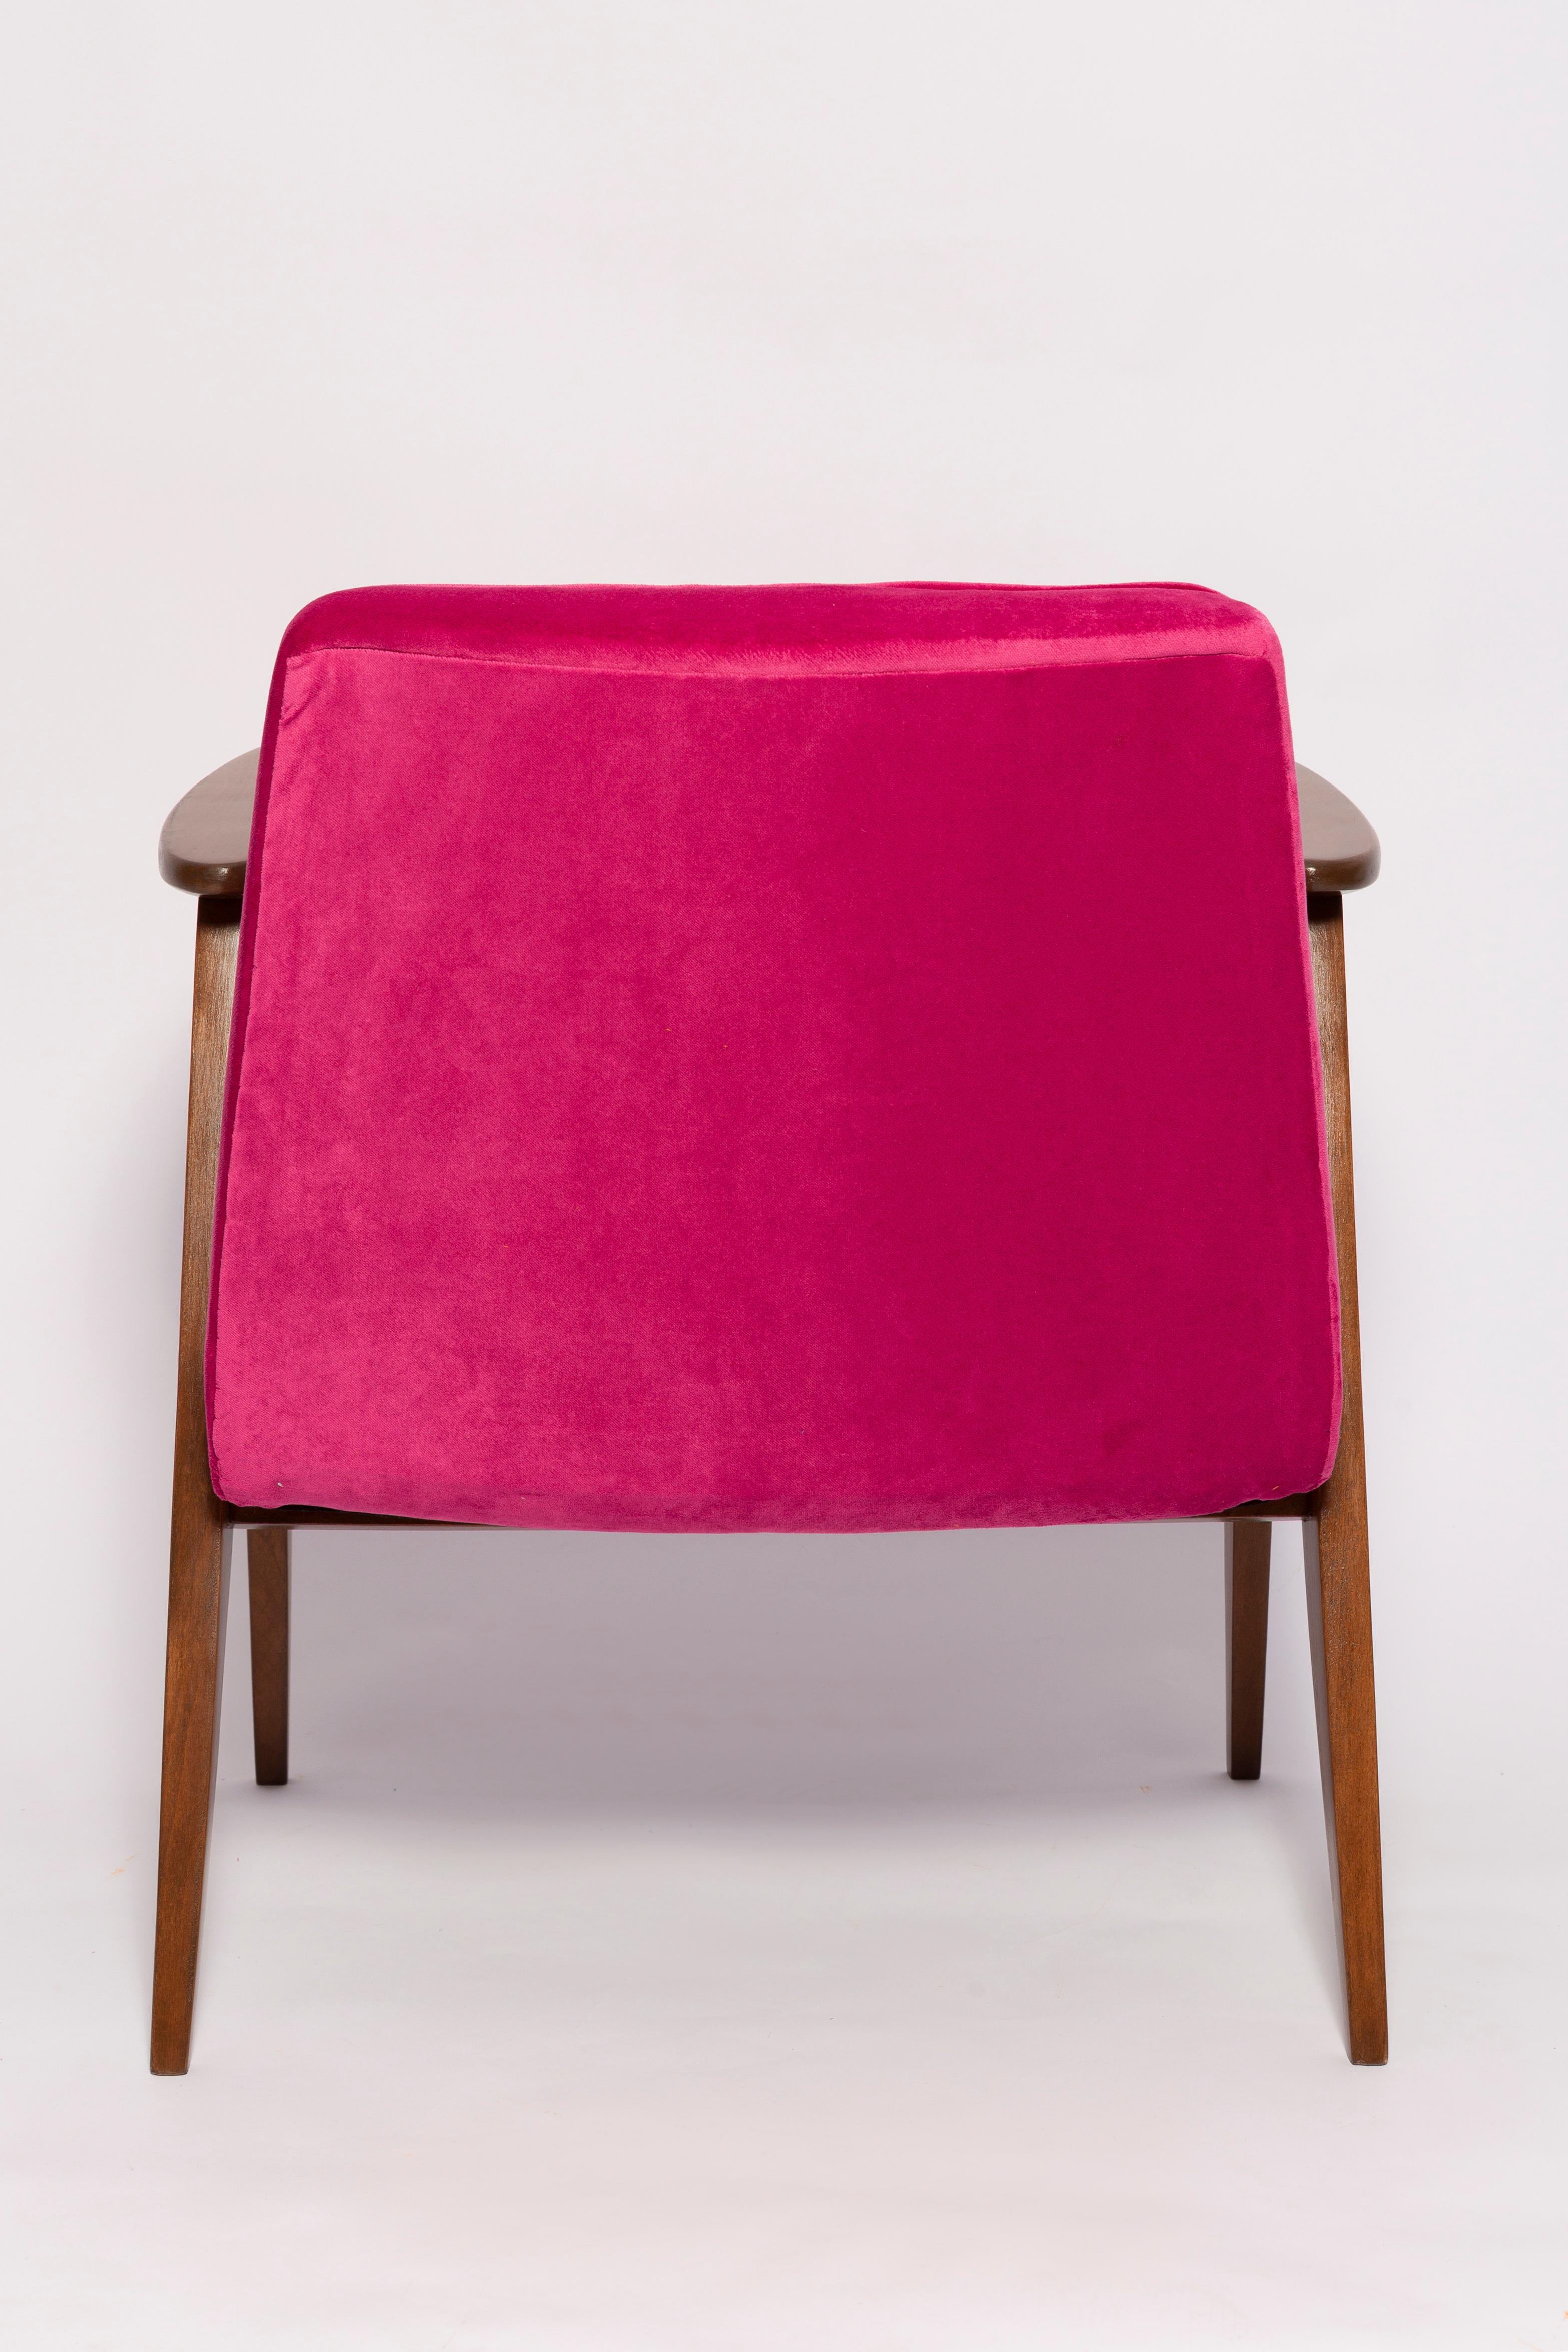 Pair of Mid-Century 366 Armchairs, Pink and Blue, by Chierowski Europe, 1960s For Sale 7